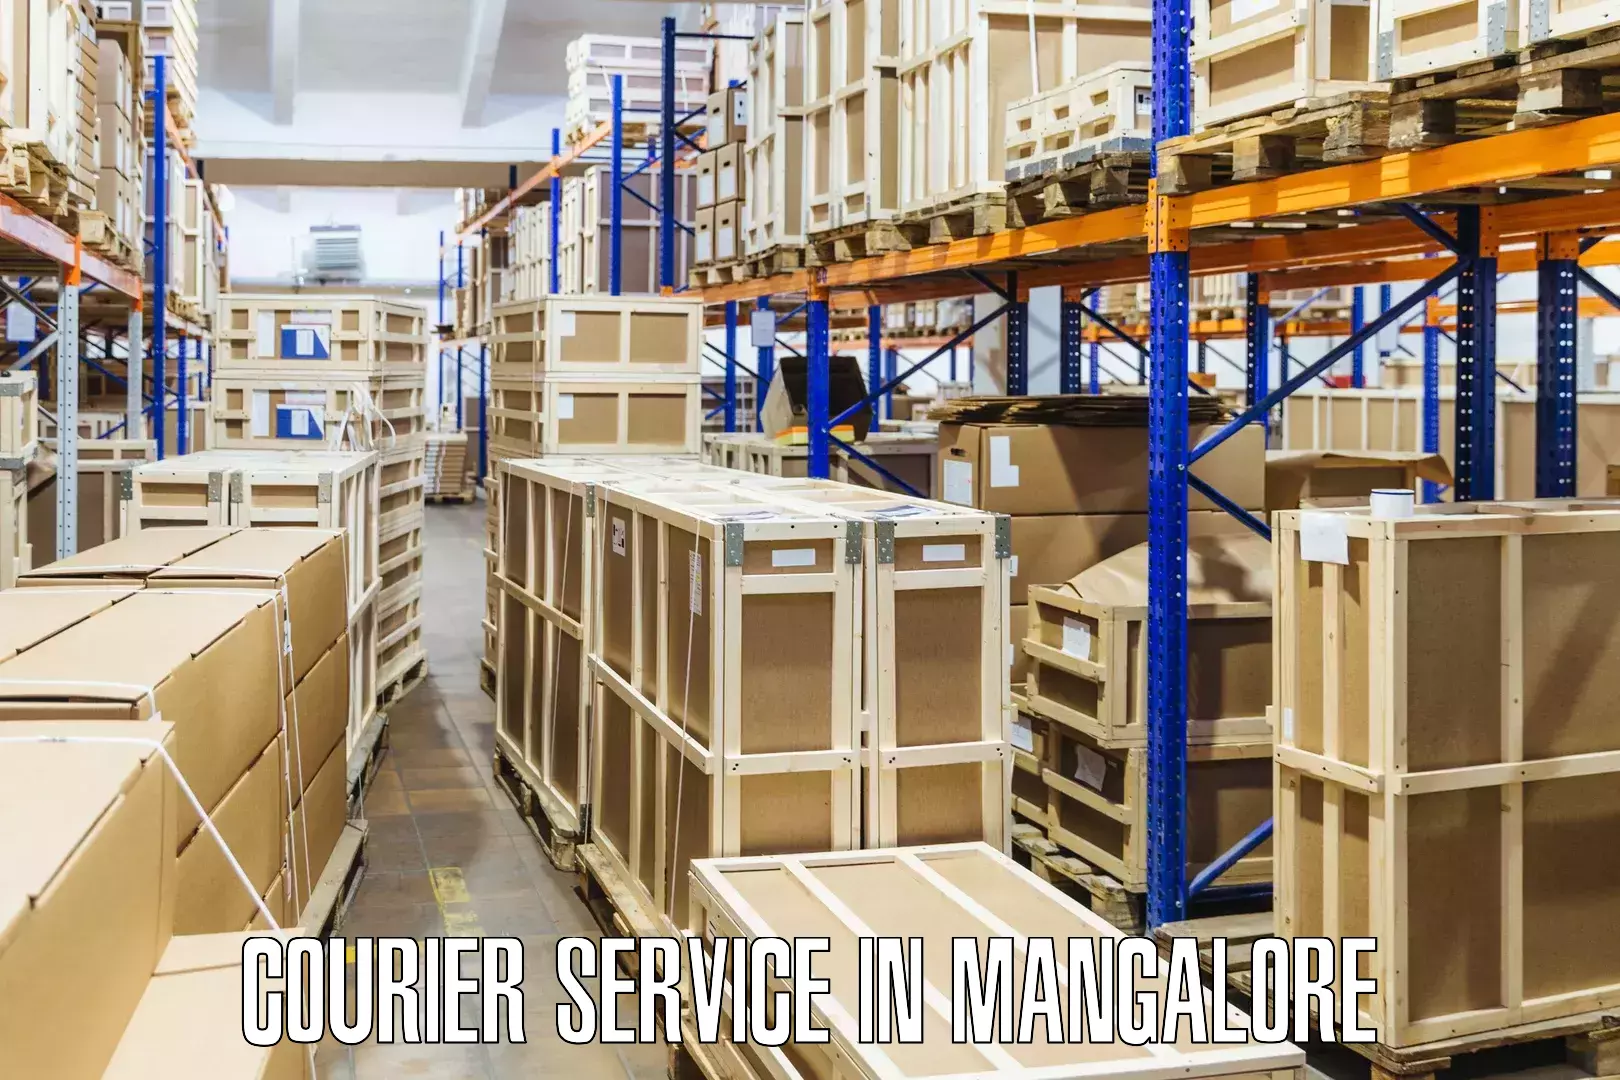 24-hour courier services in Mangalore